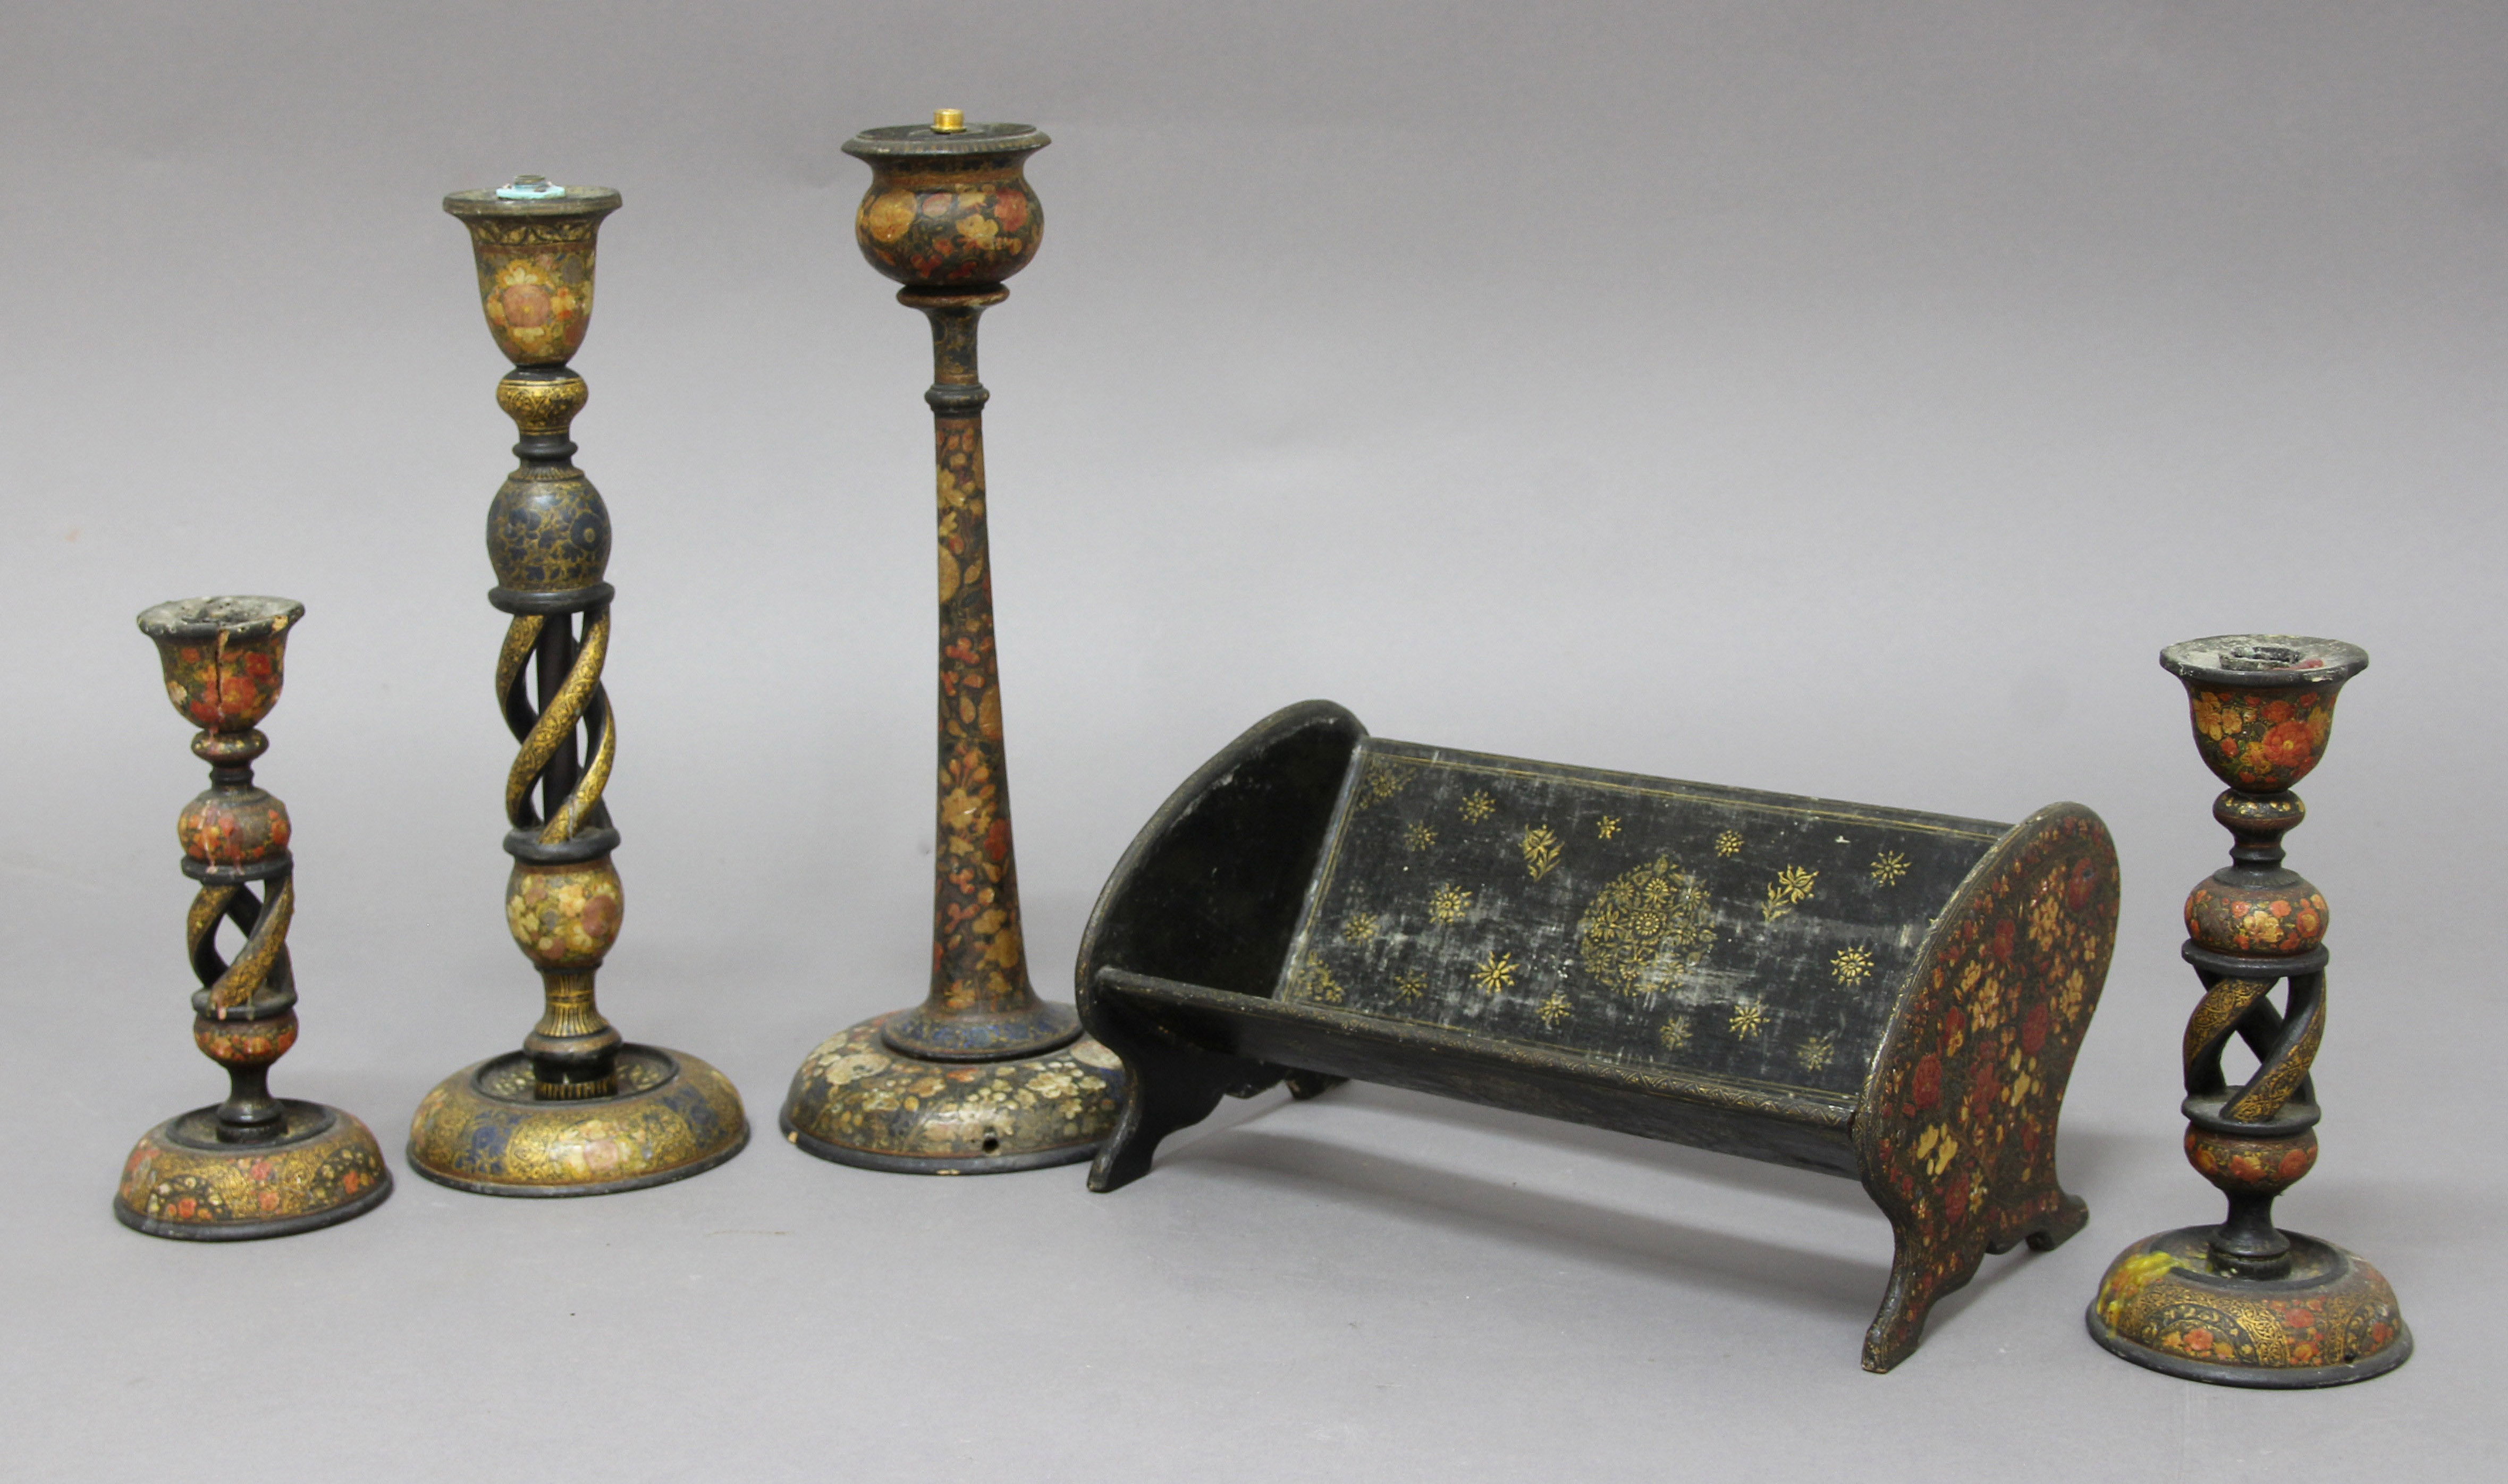 COLLECTION OF FOUR INDIAN LACQUERED CANDLESTICKS, 19th century, Kashmiri, with painted and gilt